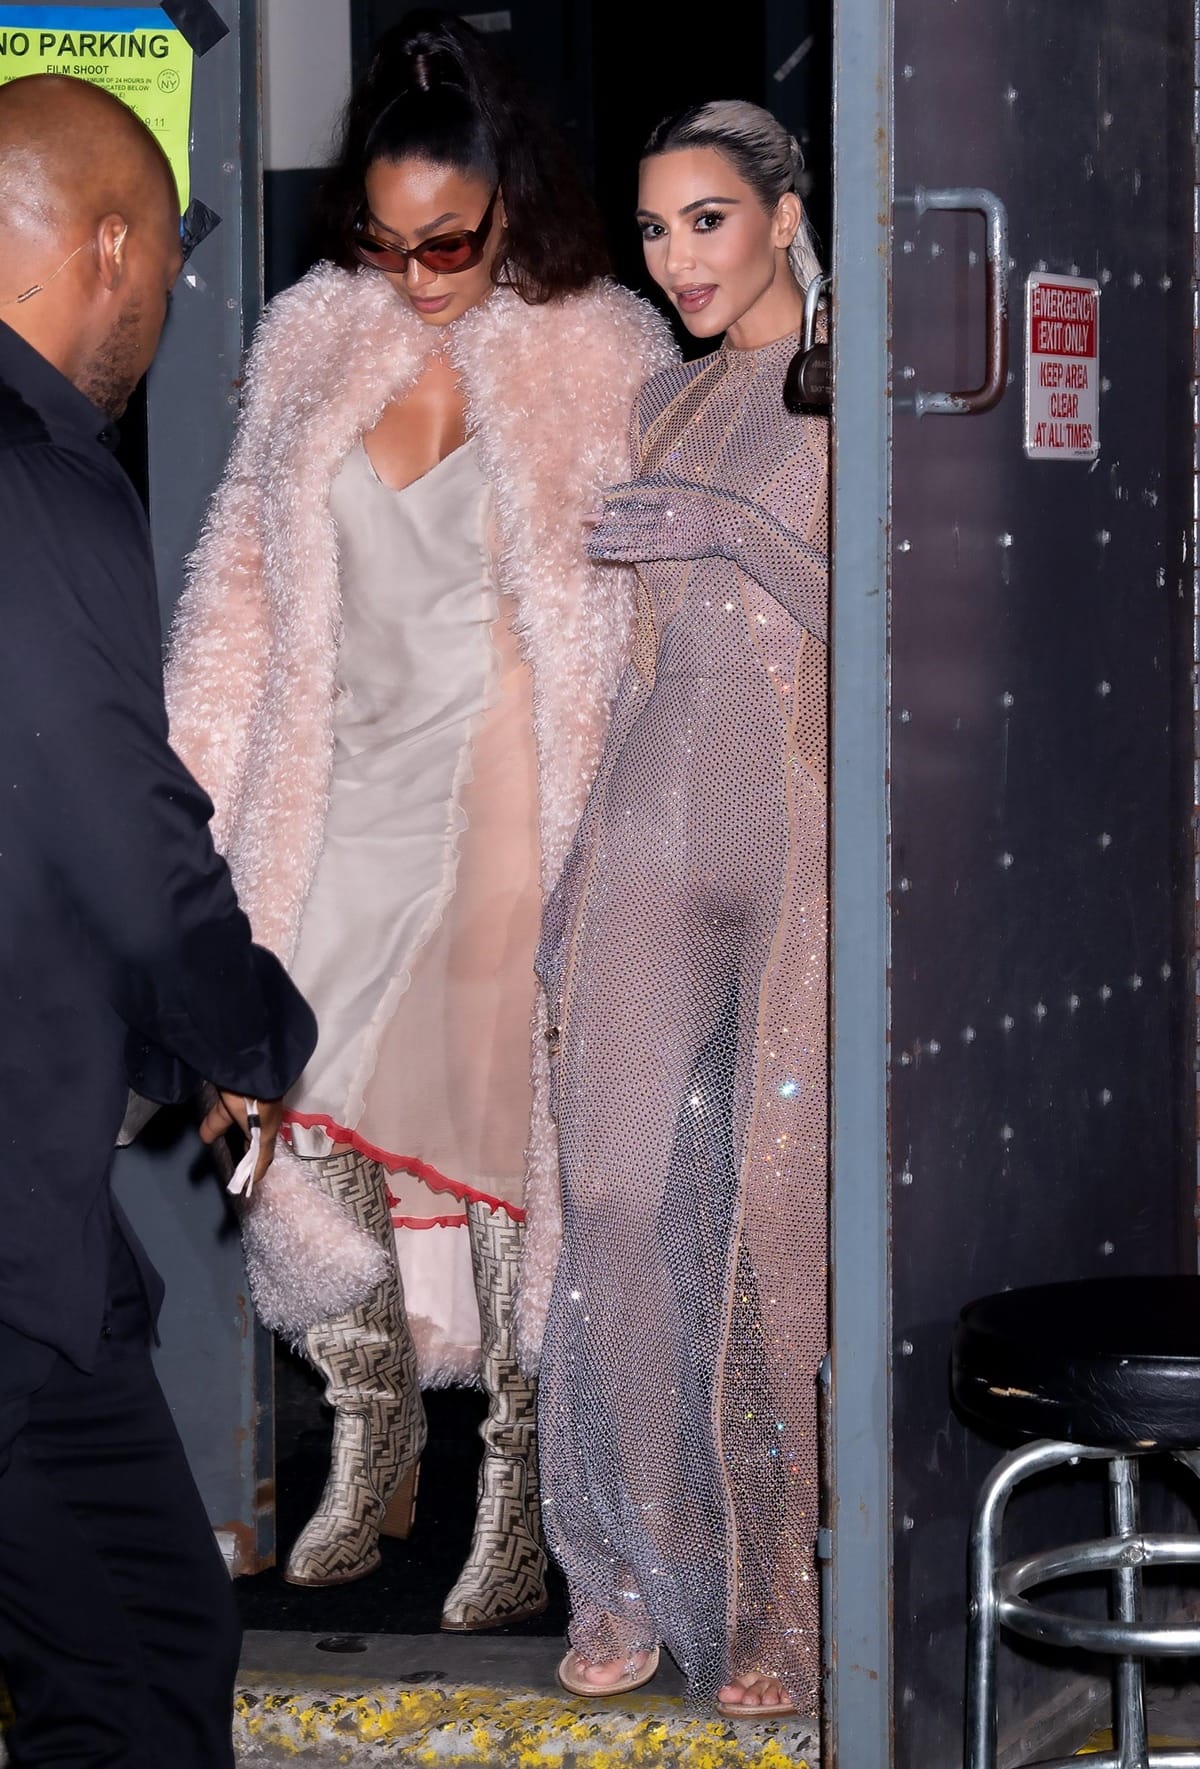 Kim Kardashian and LaLa Anthony make their way to the Fendi after party